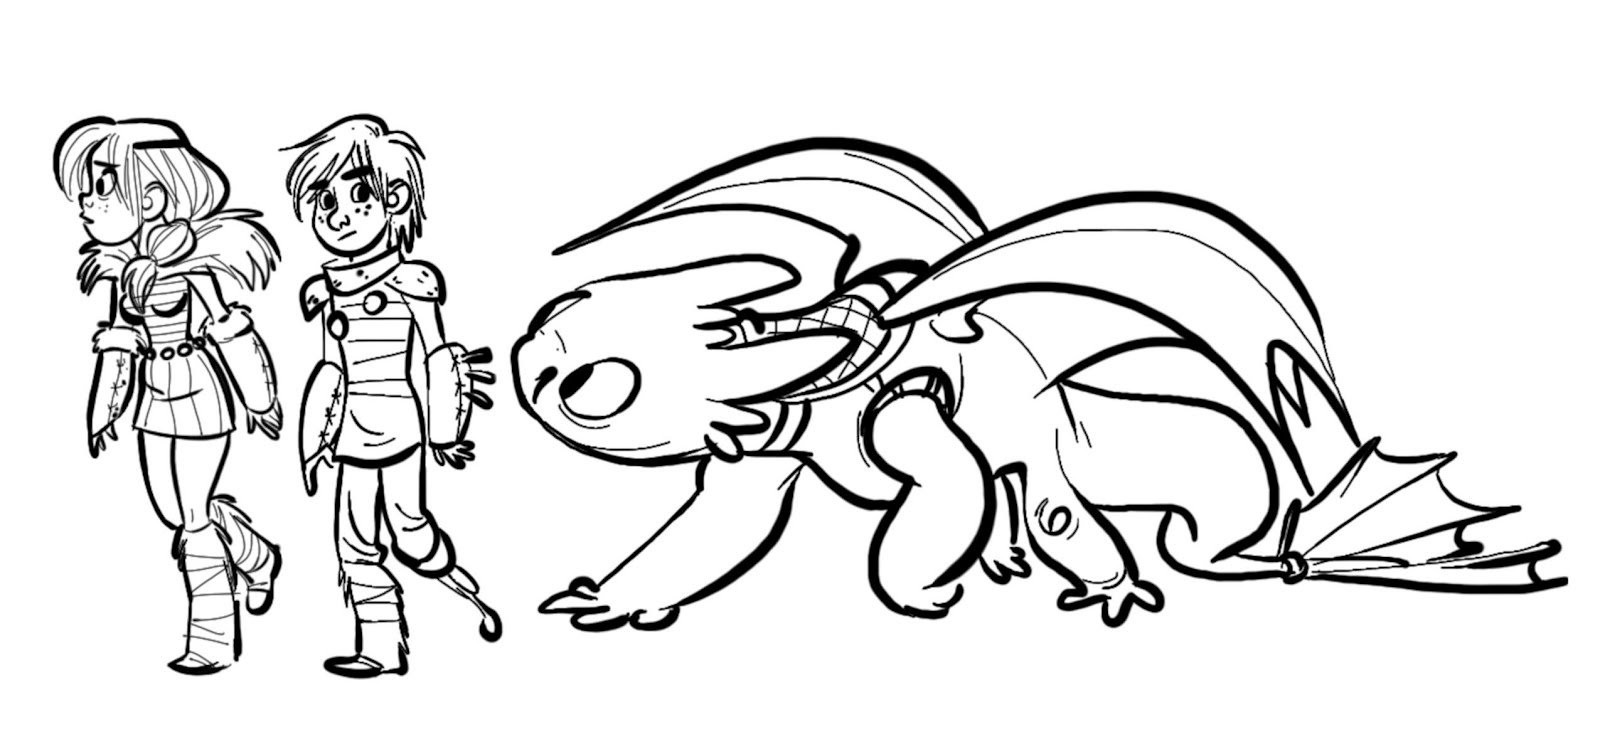 Toothless Dragon Coloring Page at GetColorings.com | Free printable